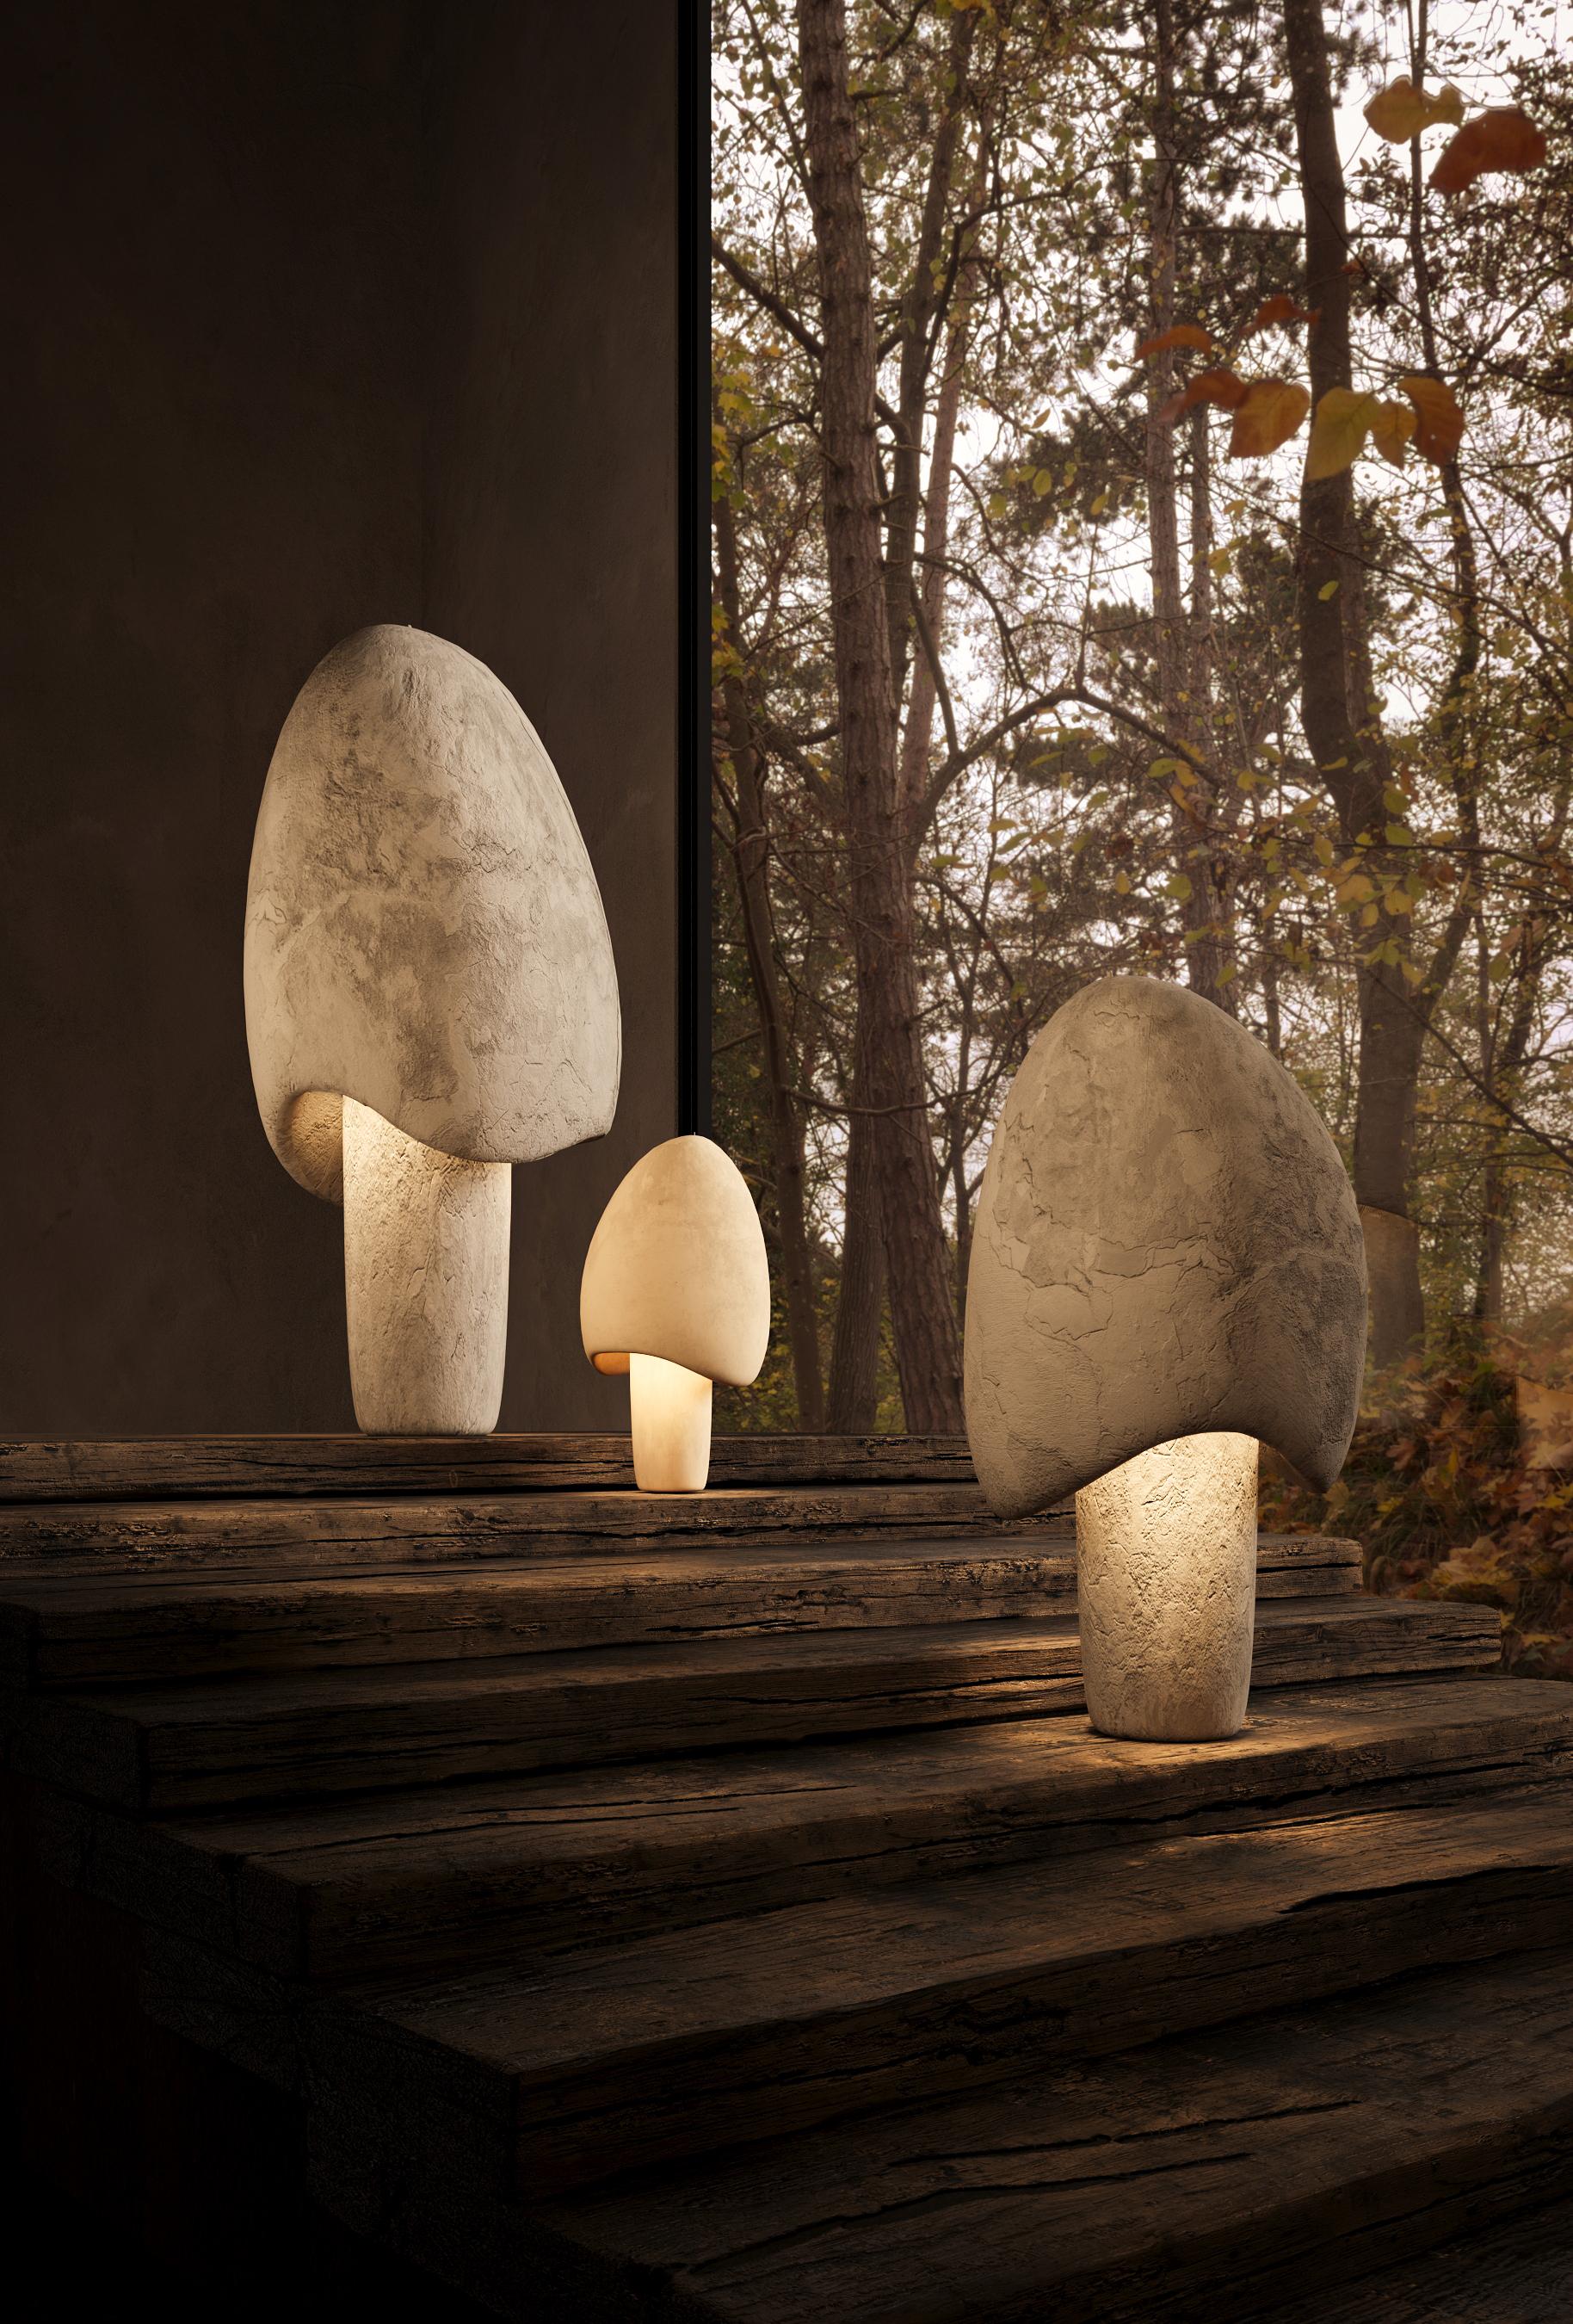 Is one of the most amazing designer lamps in the world. Its natural
morphic shape and whimsical light design will transport you to a
magical meadow, a place of shimmering joyful peace. These
